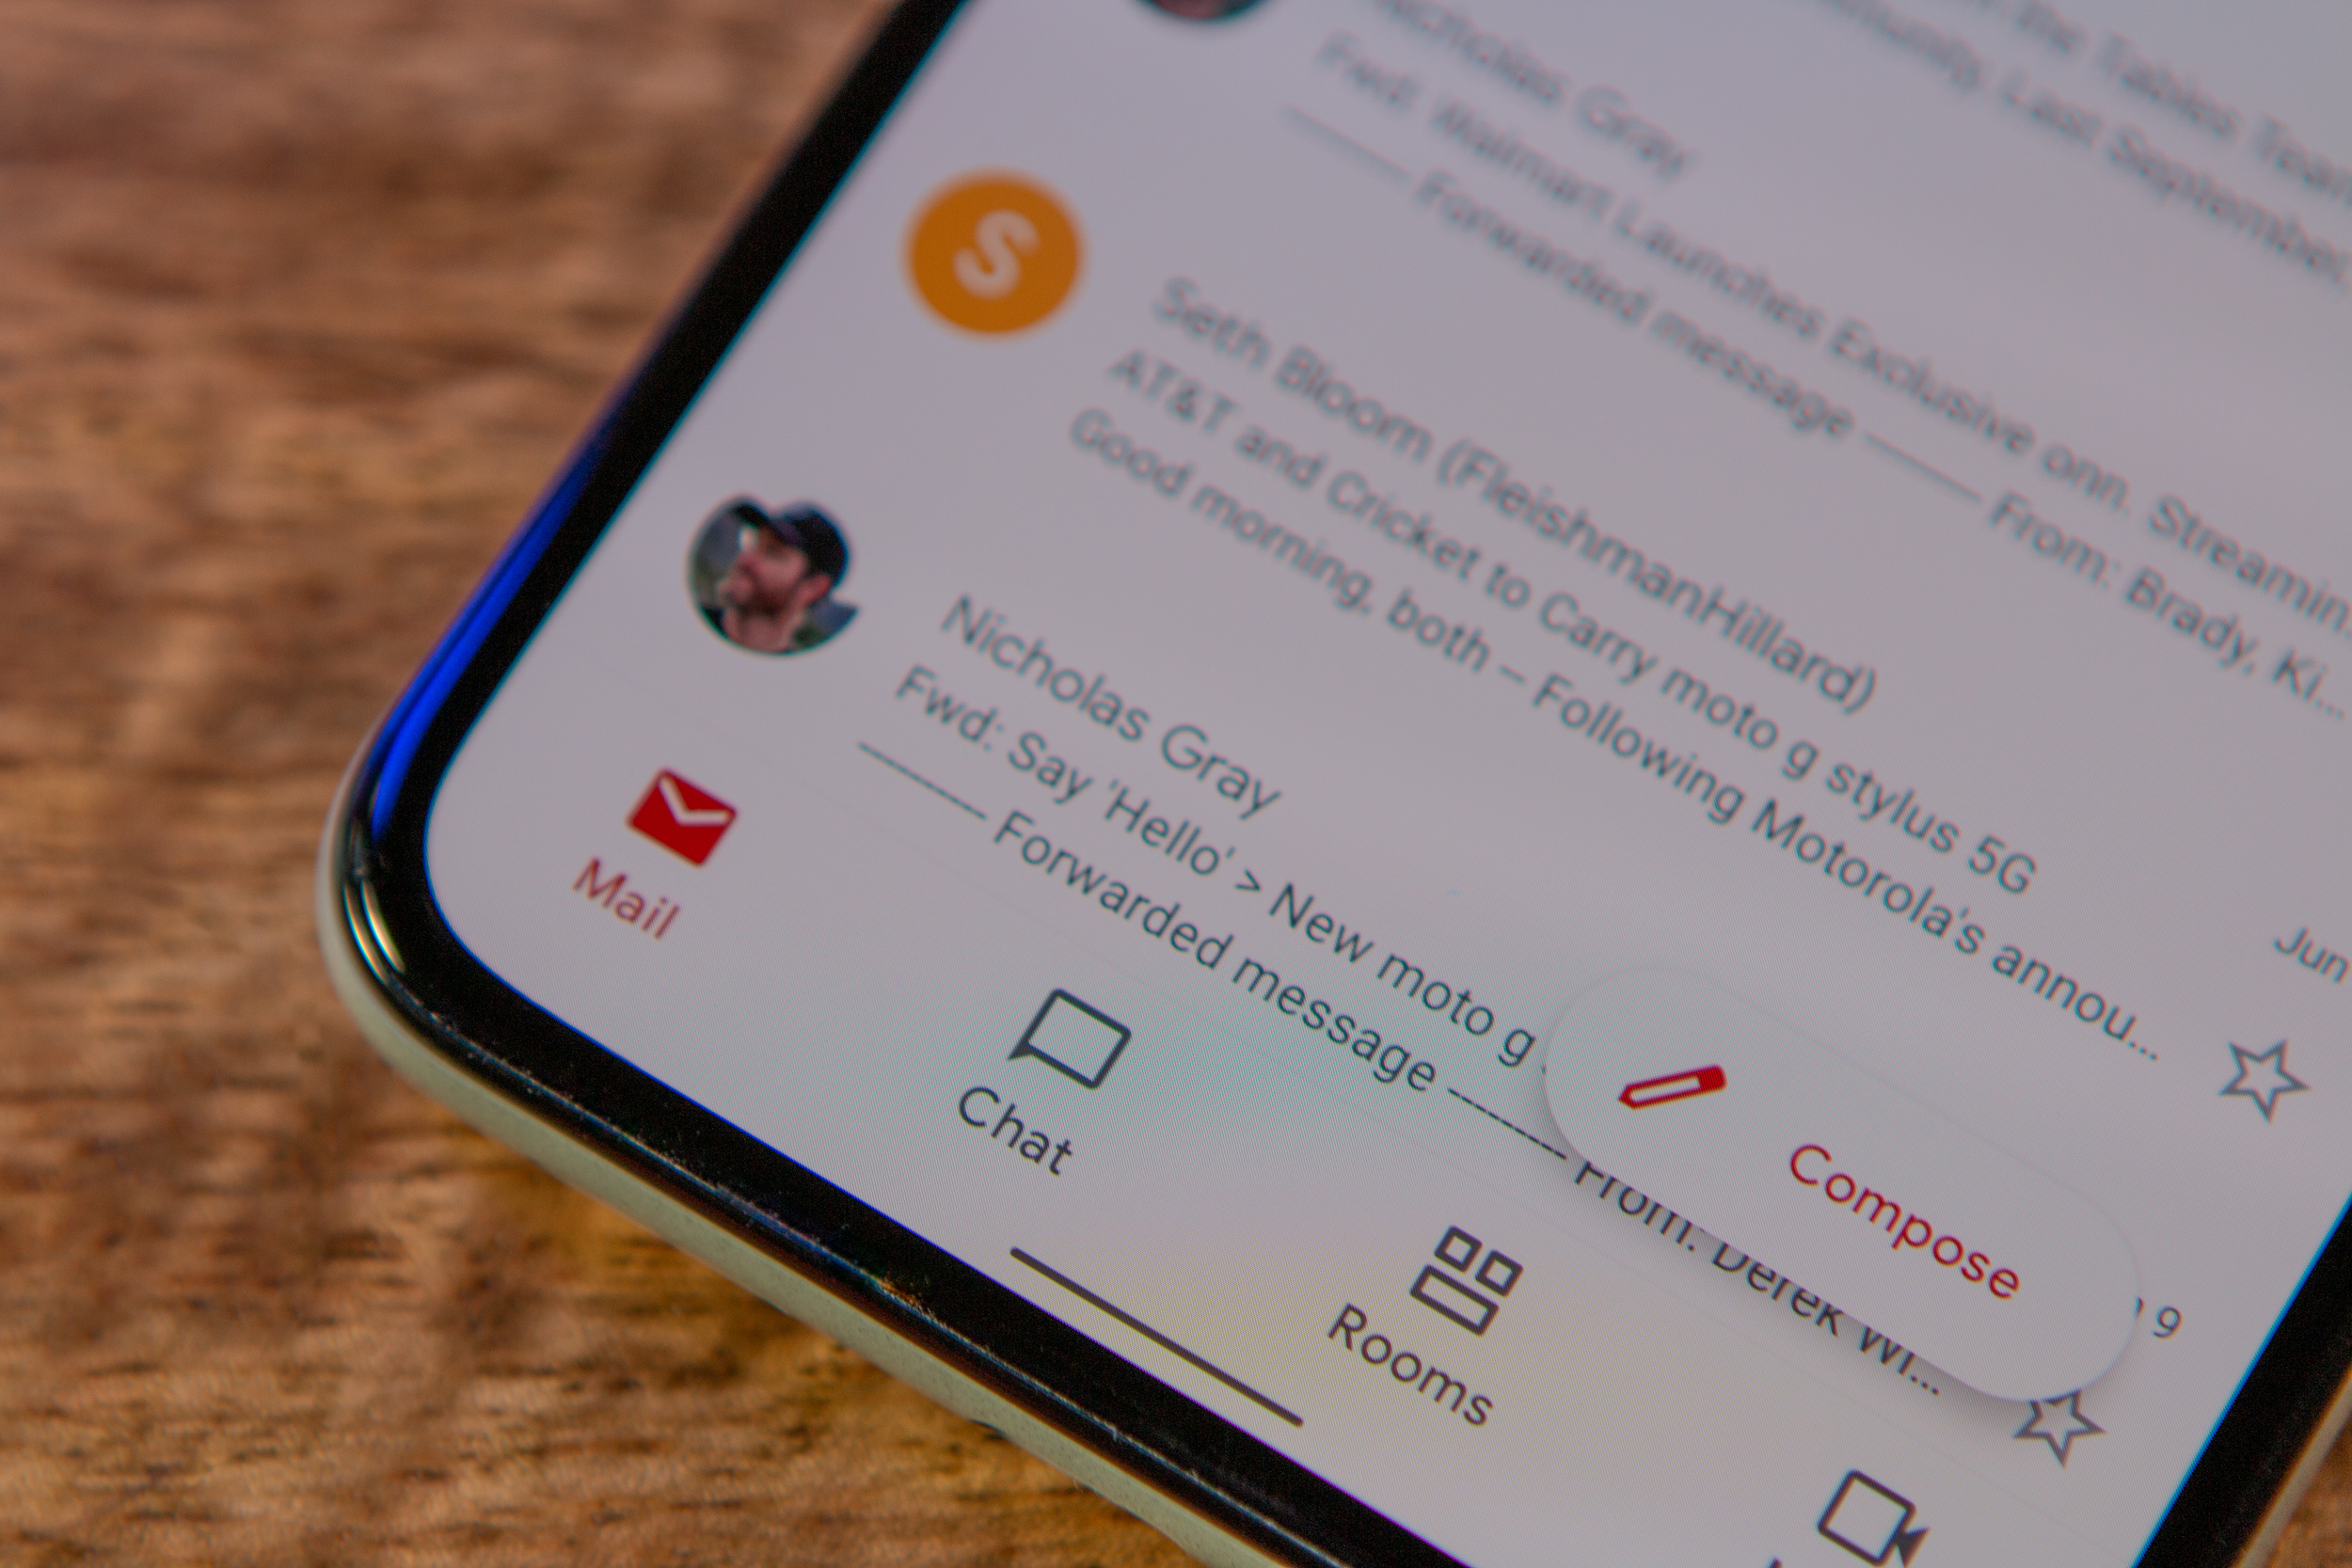 Gmail users can now more conveniently schedule meetings